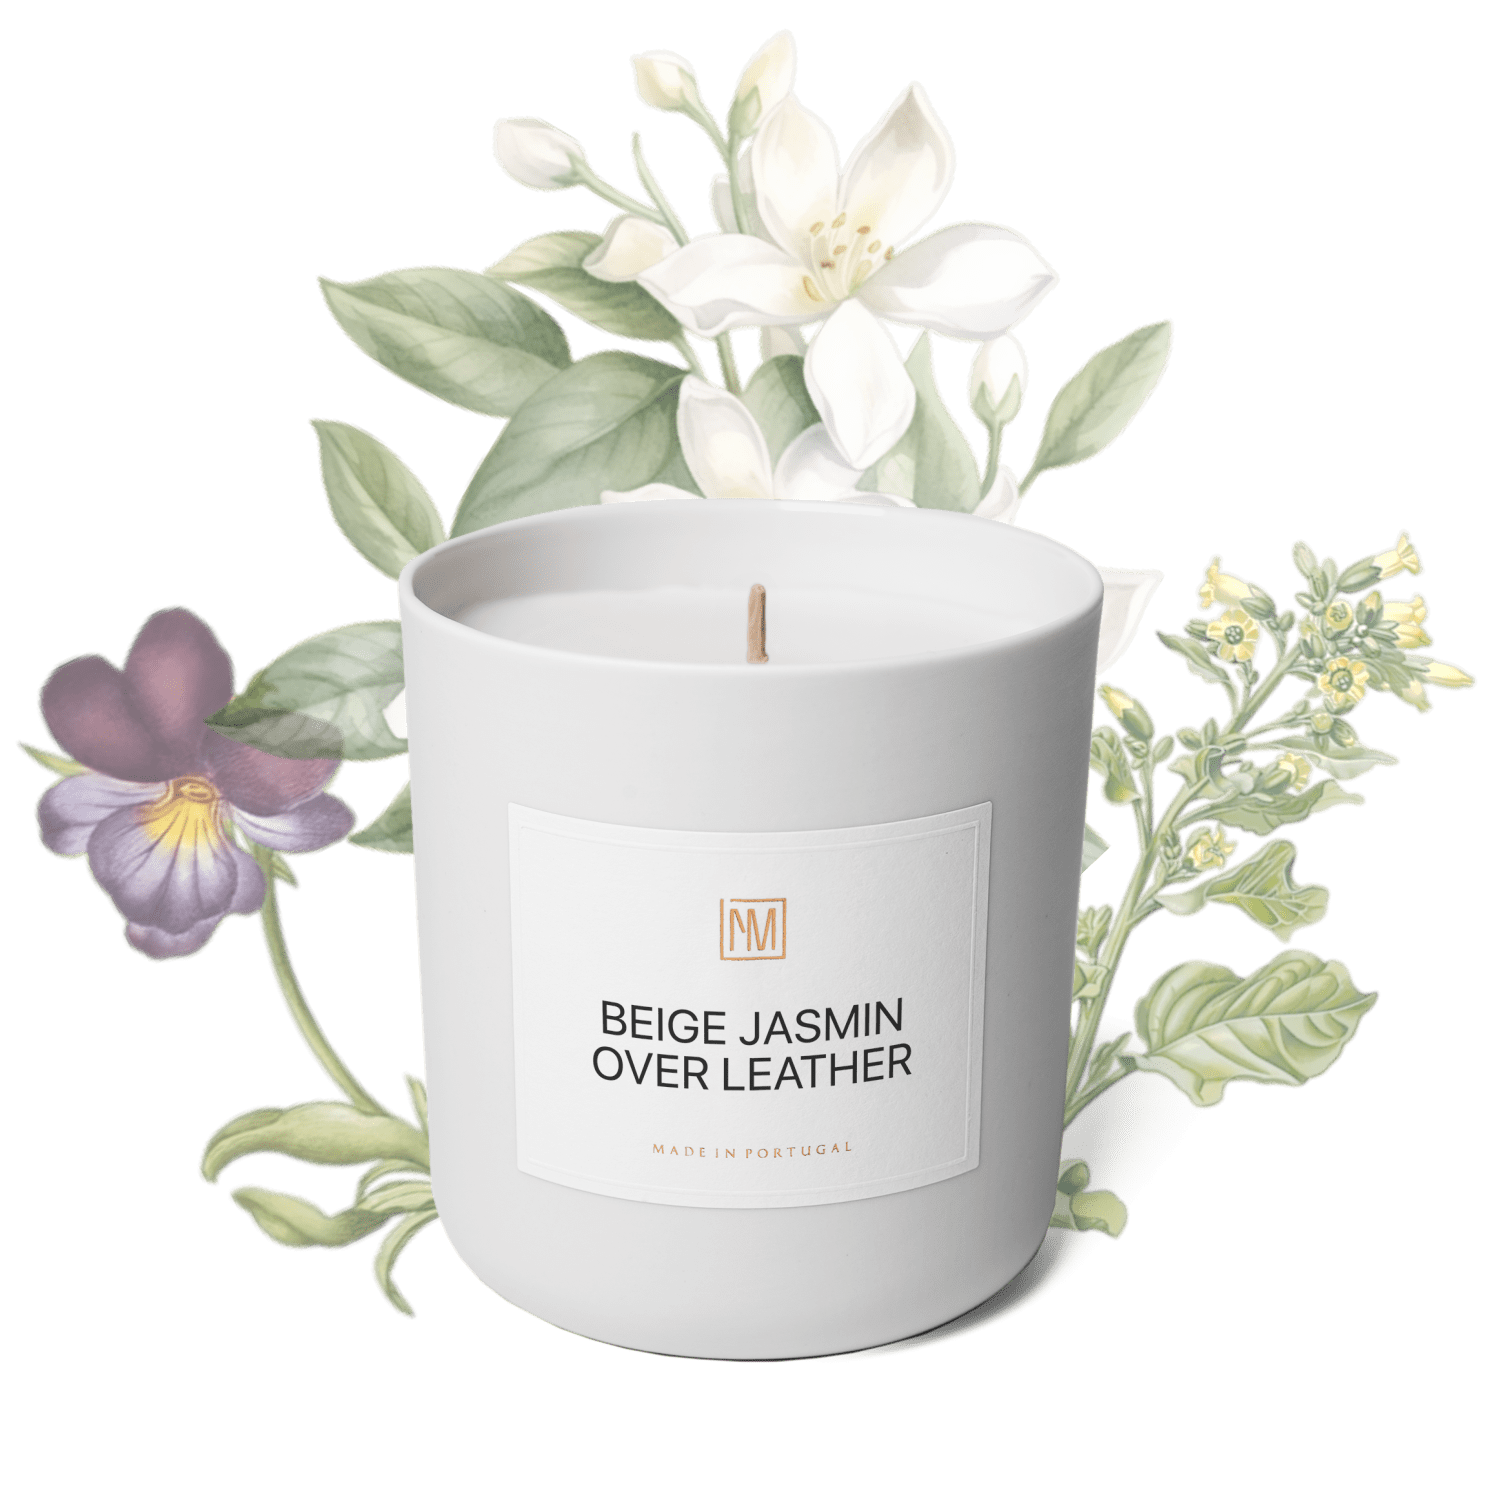 Beige Jasmin over Leather Scented Candle